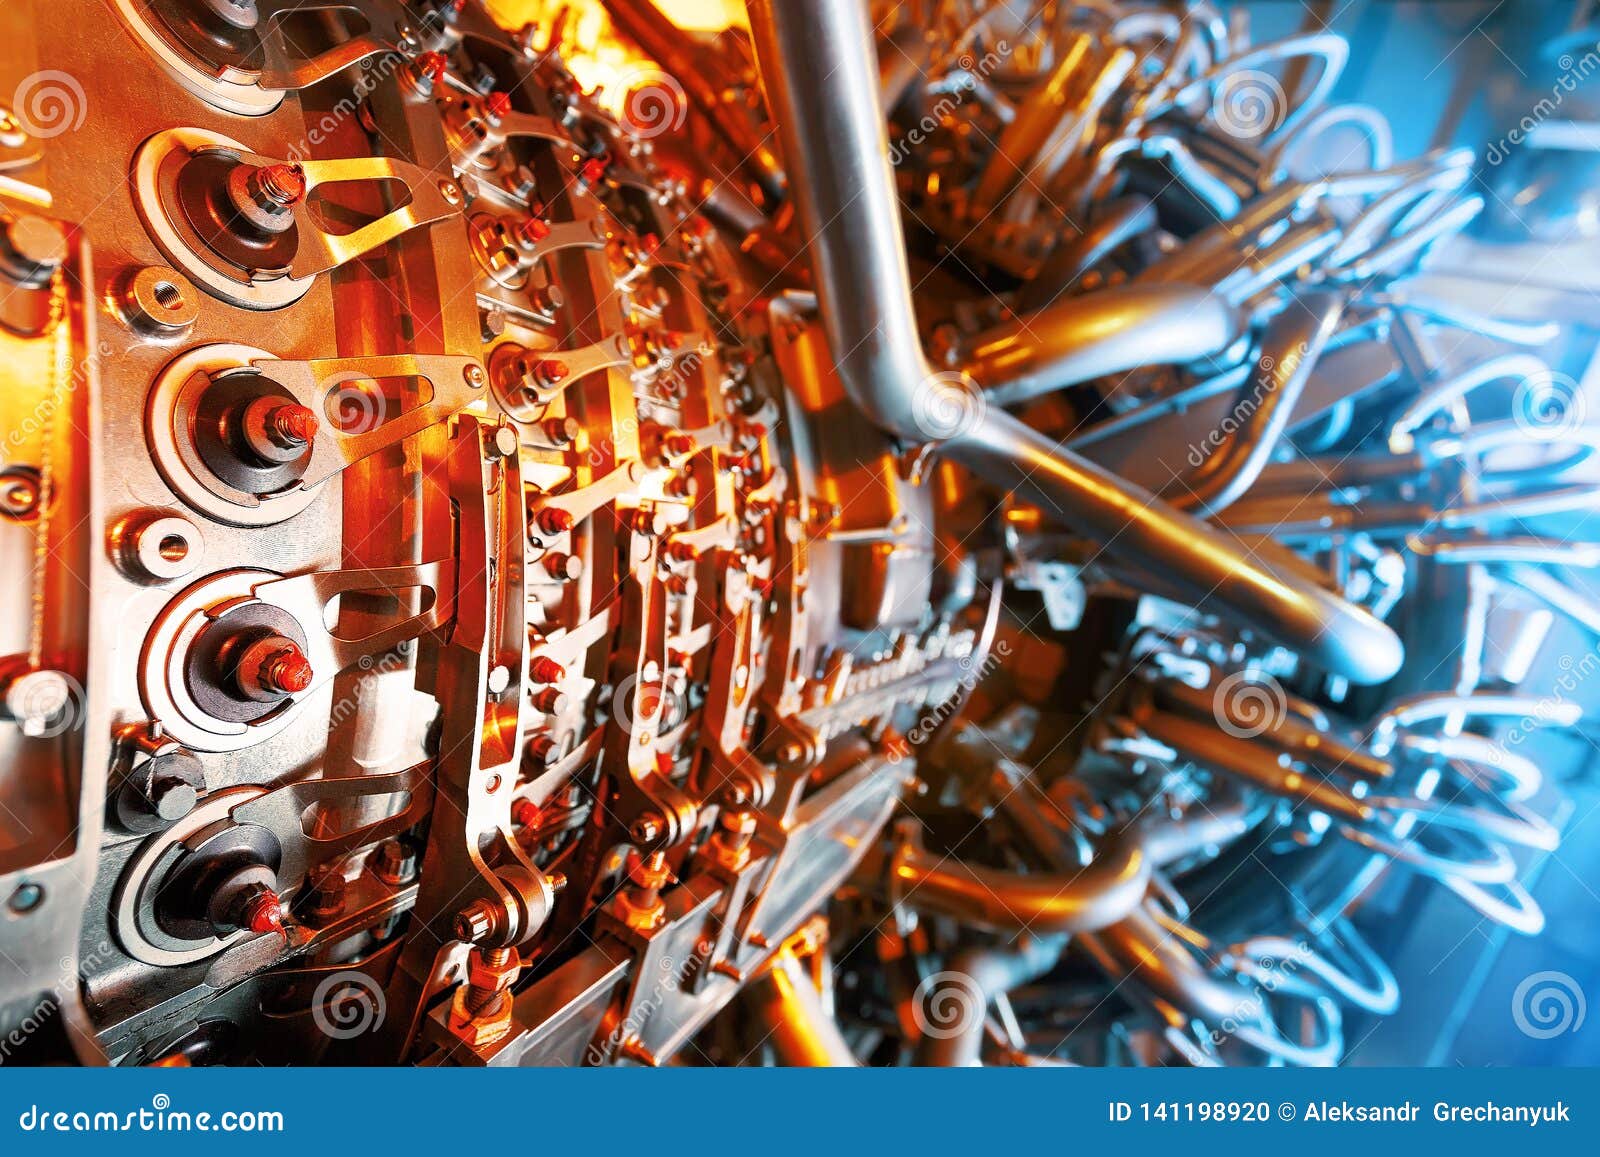 Gas Turbine Engine Located Inside the Aircraft. Clean Energy in a Power Plant Used on an Offshore Oil and Gas Central Stock Image of generation, flow: 141198920